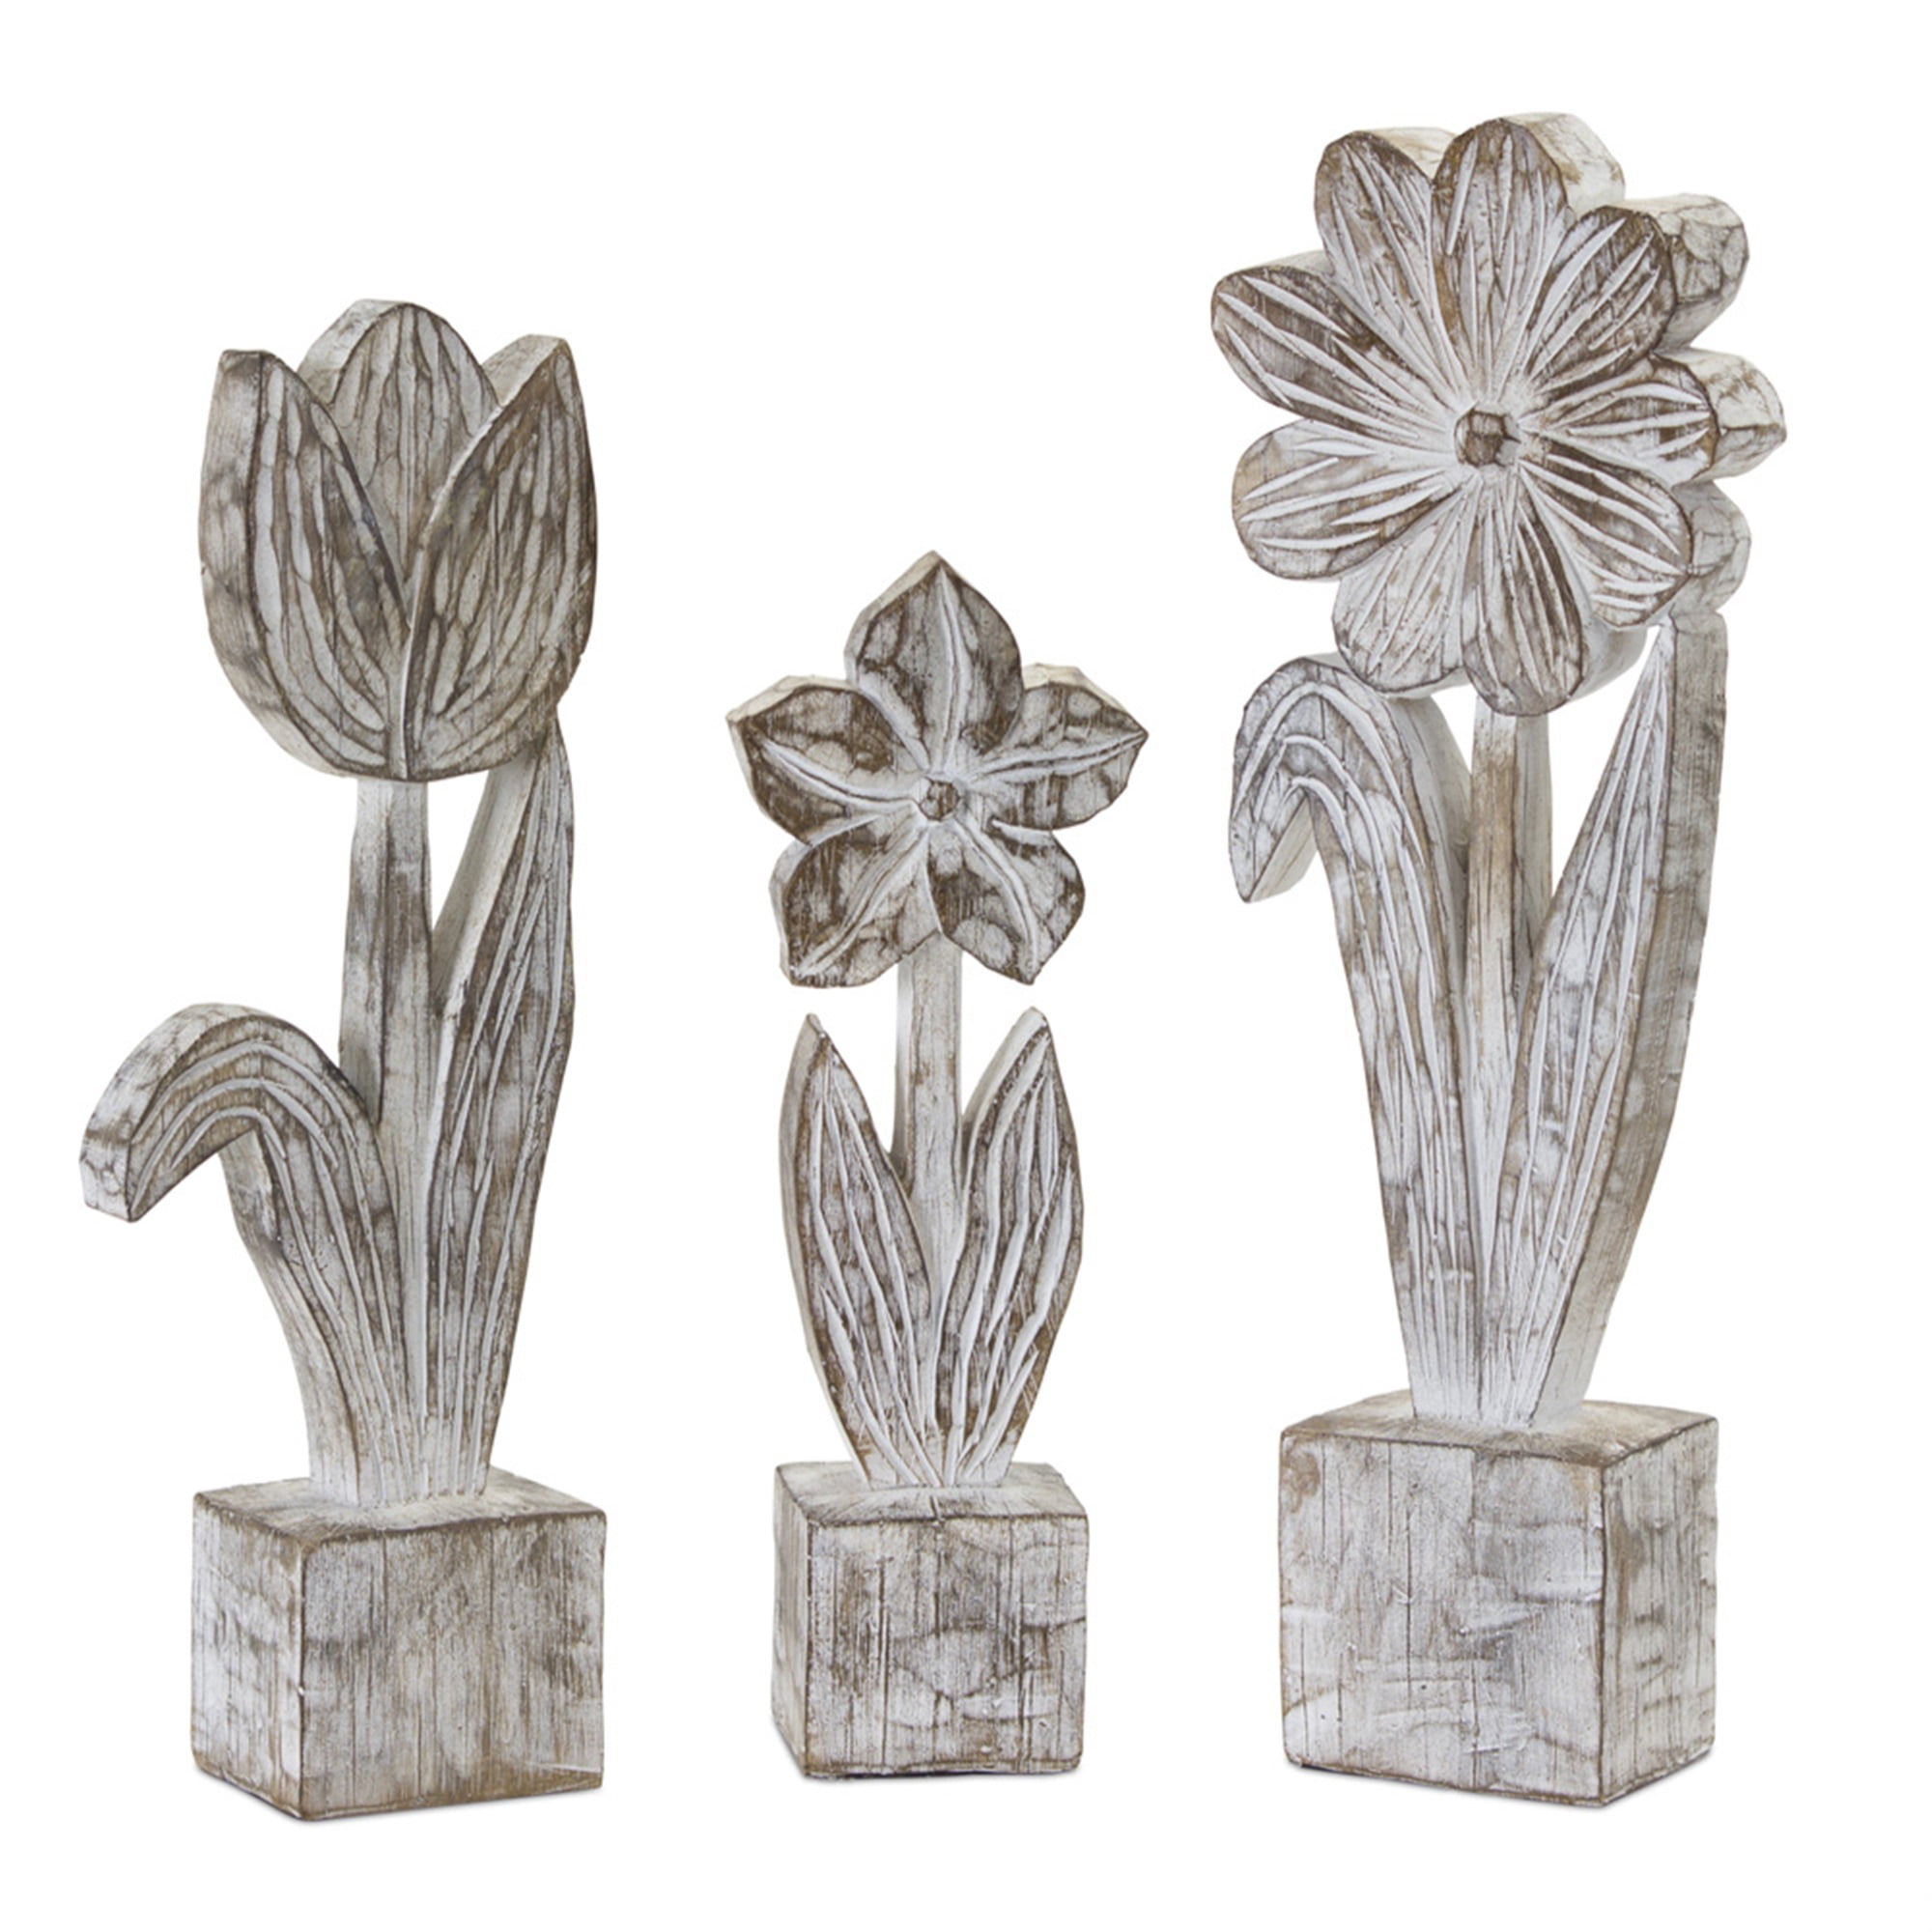 Potted Floral (Set of 3) 10.5"H, 12.75"H, 14.25"H Resin/Stone Powder